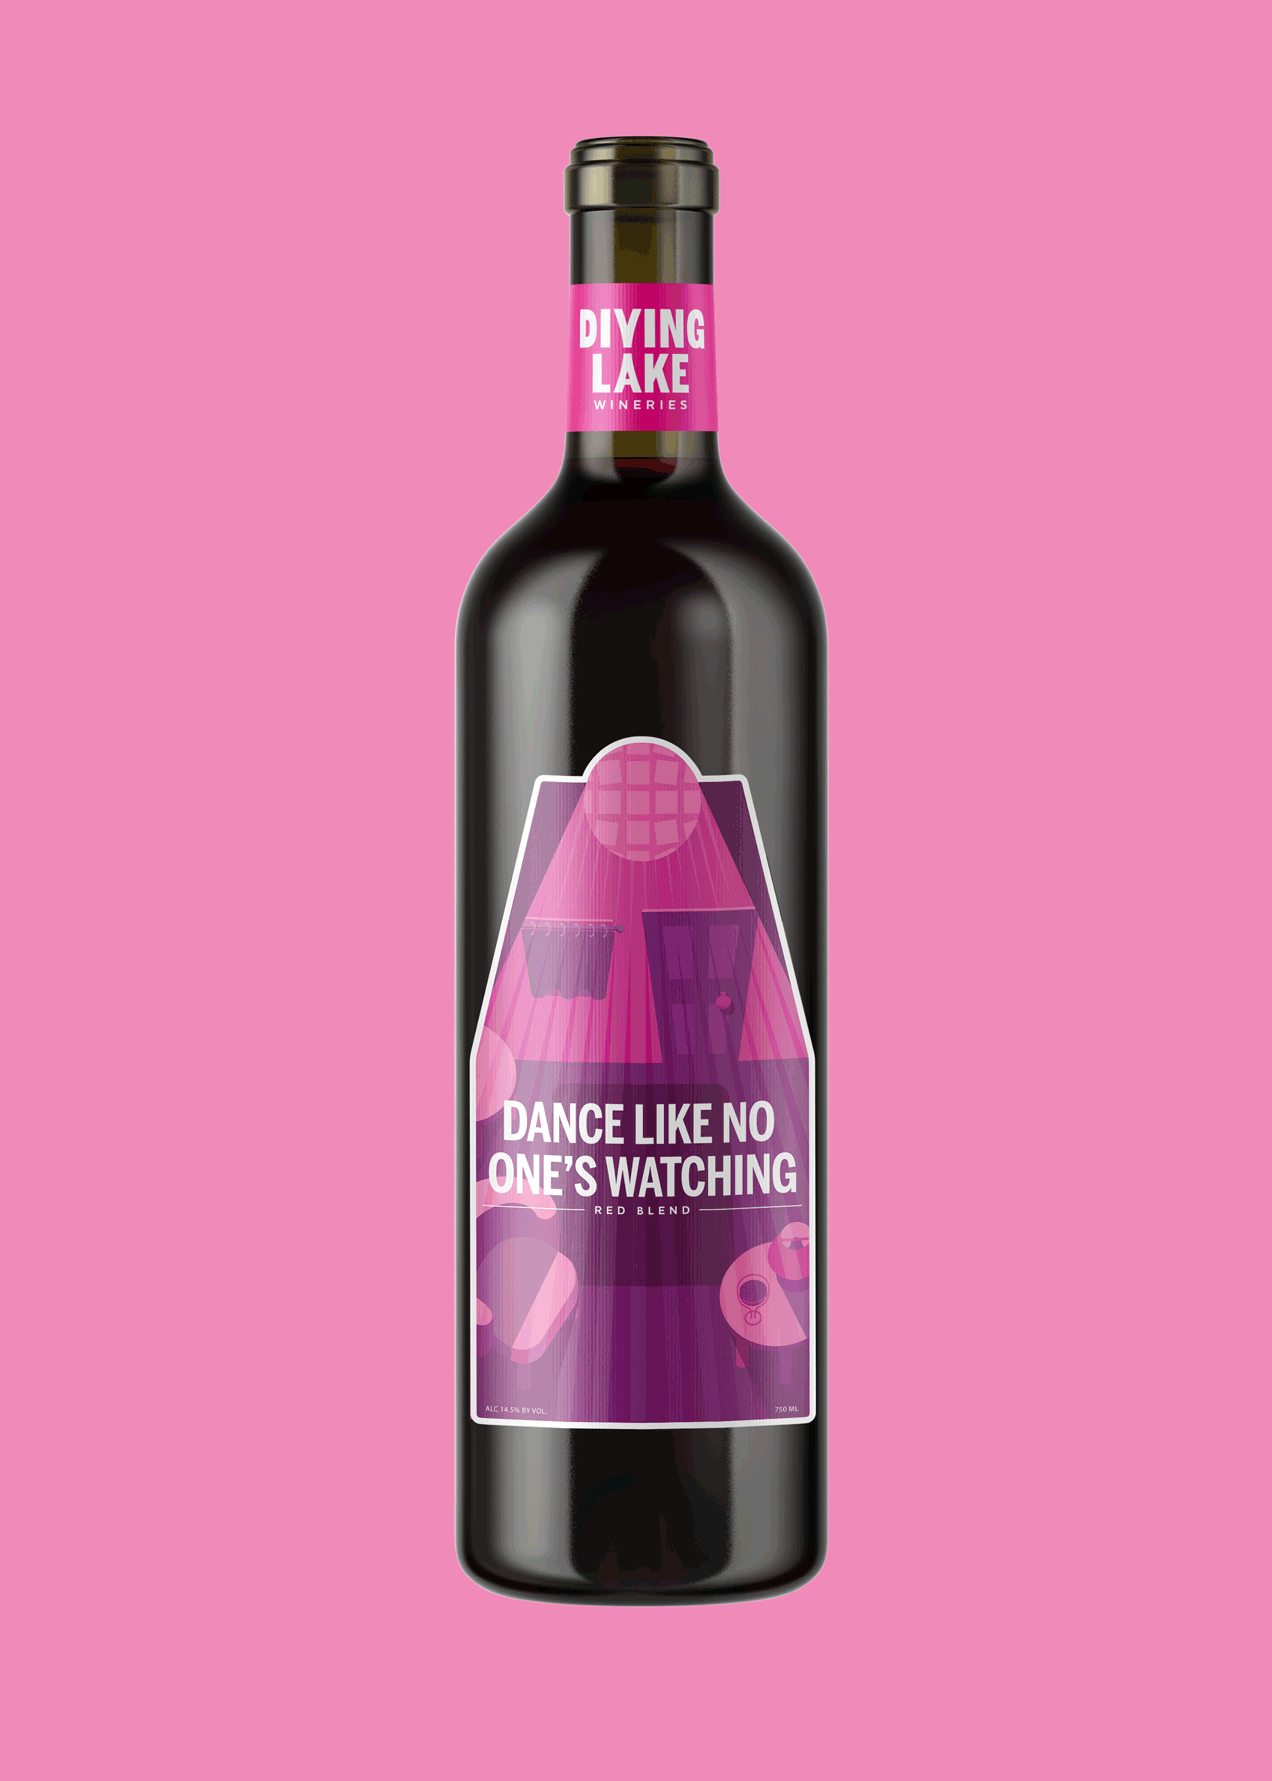 Gif of a wine bottle spinning. Label says 'Dance Like No One's Watching.'